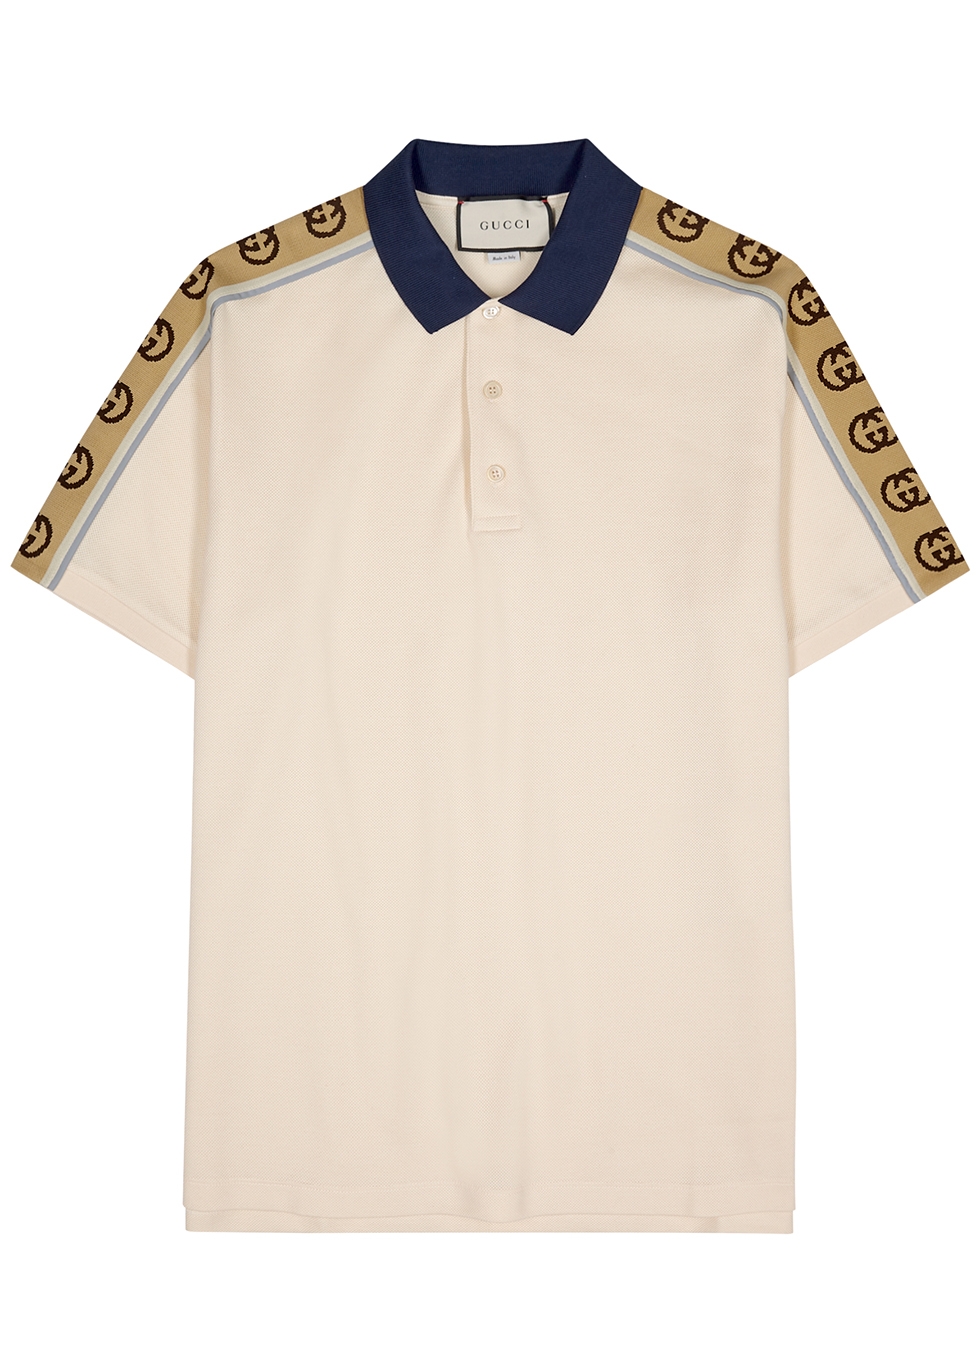 gucci polo outfit